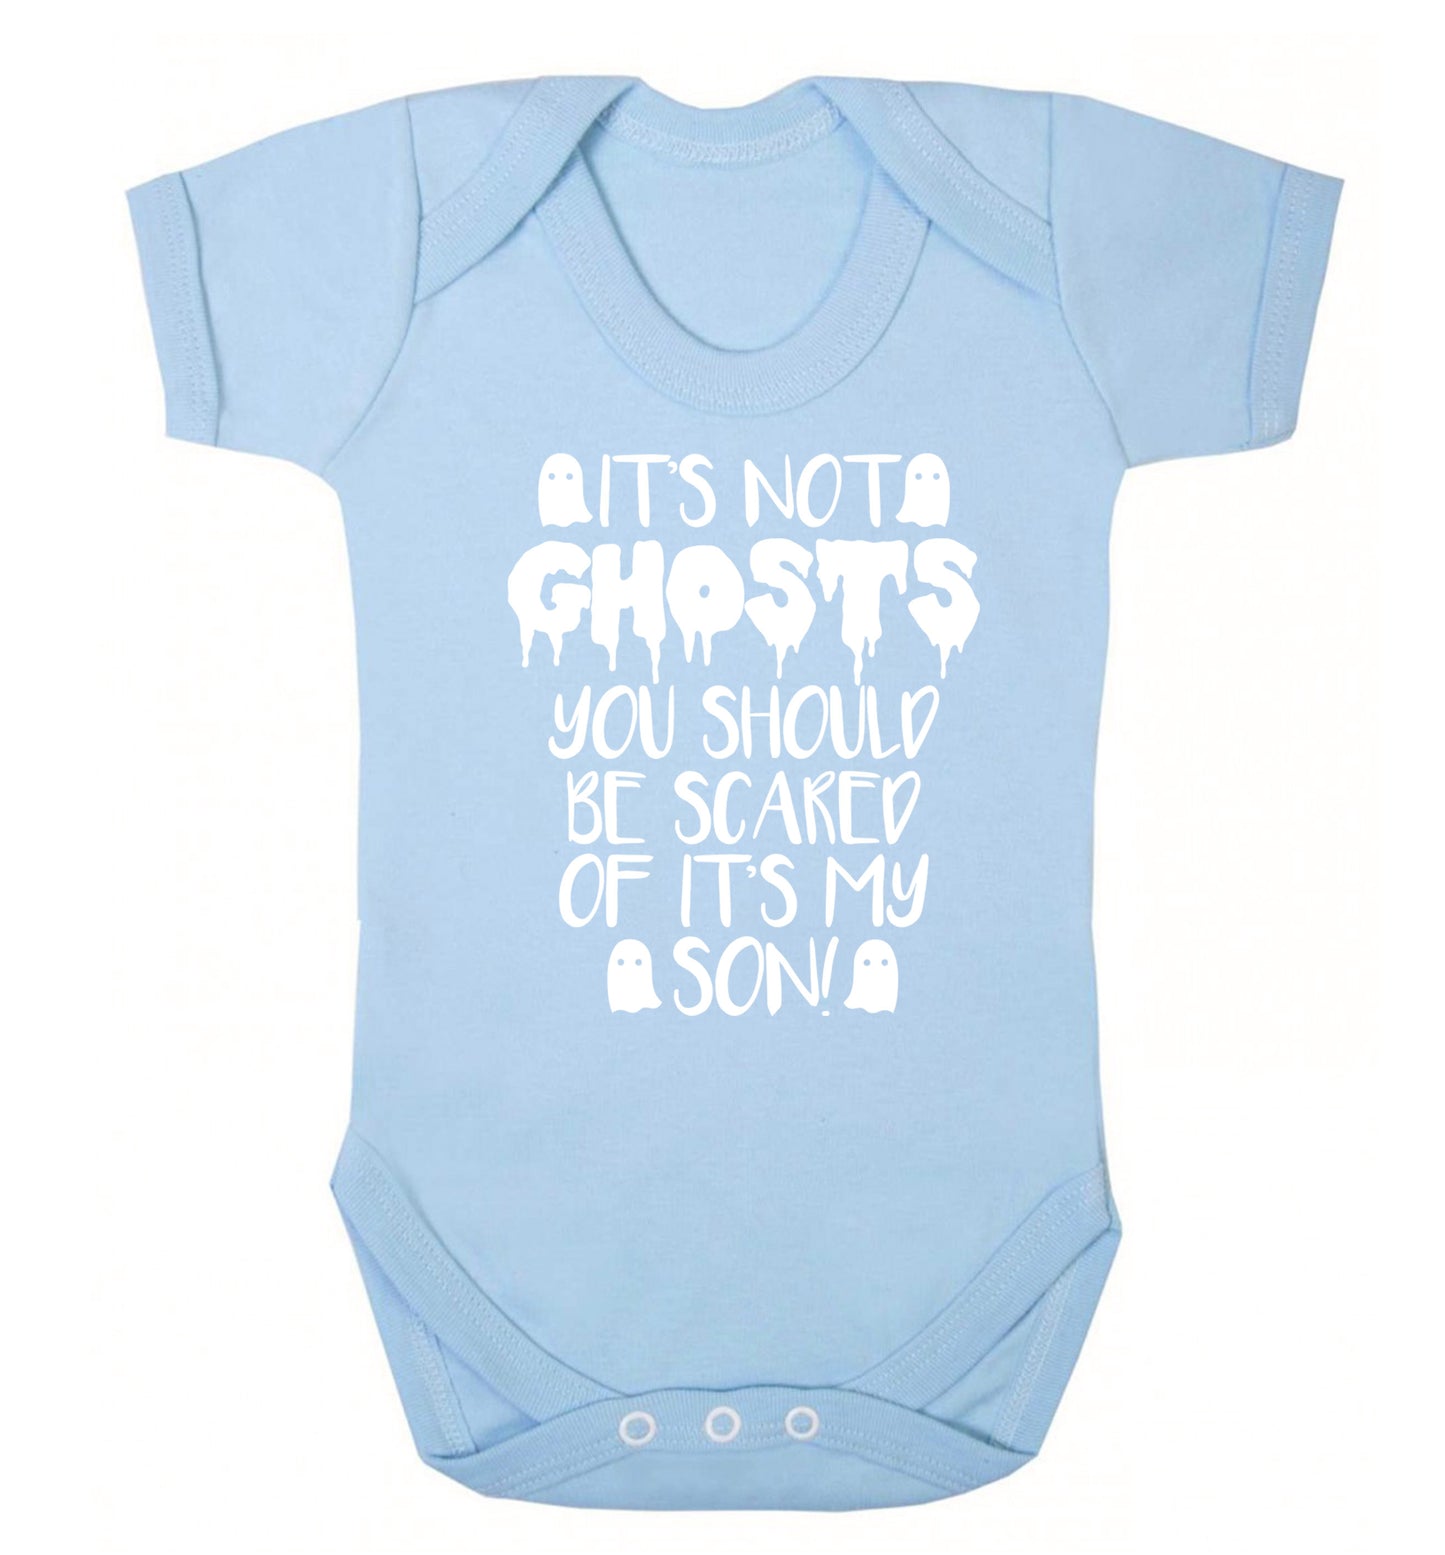 It's not ghosts you should be scared of it's my son! Baby Vest pale blue 18-24 months